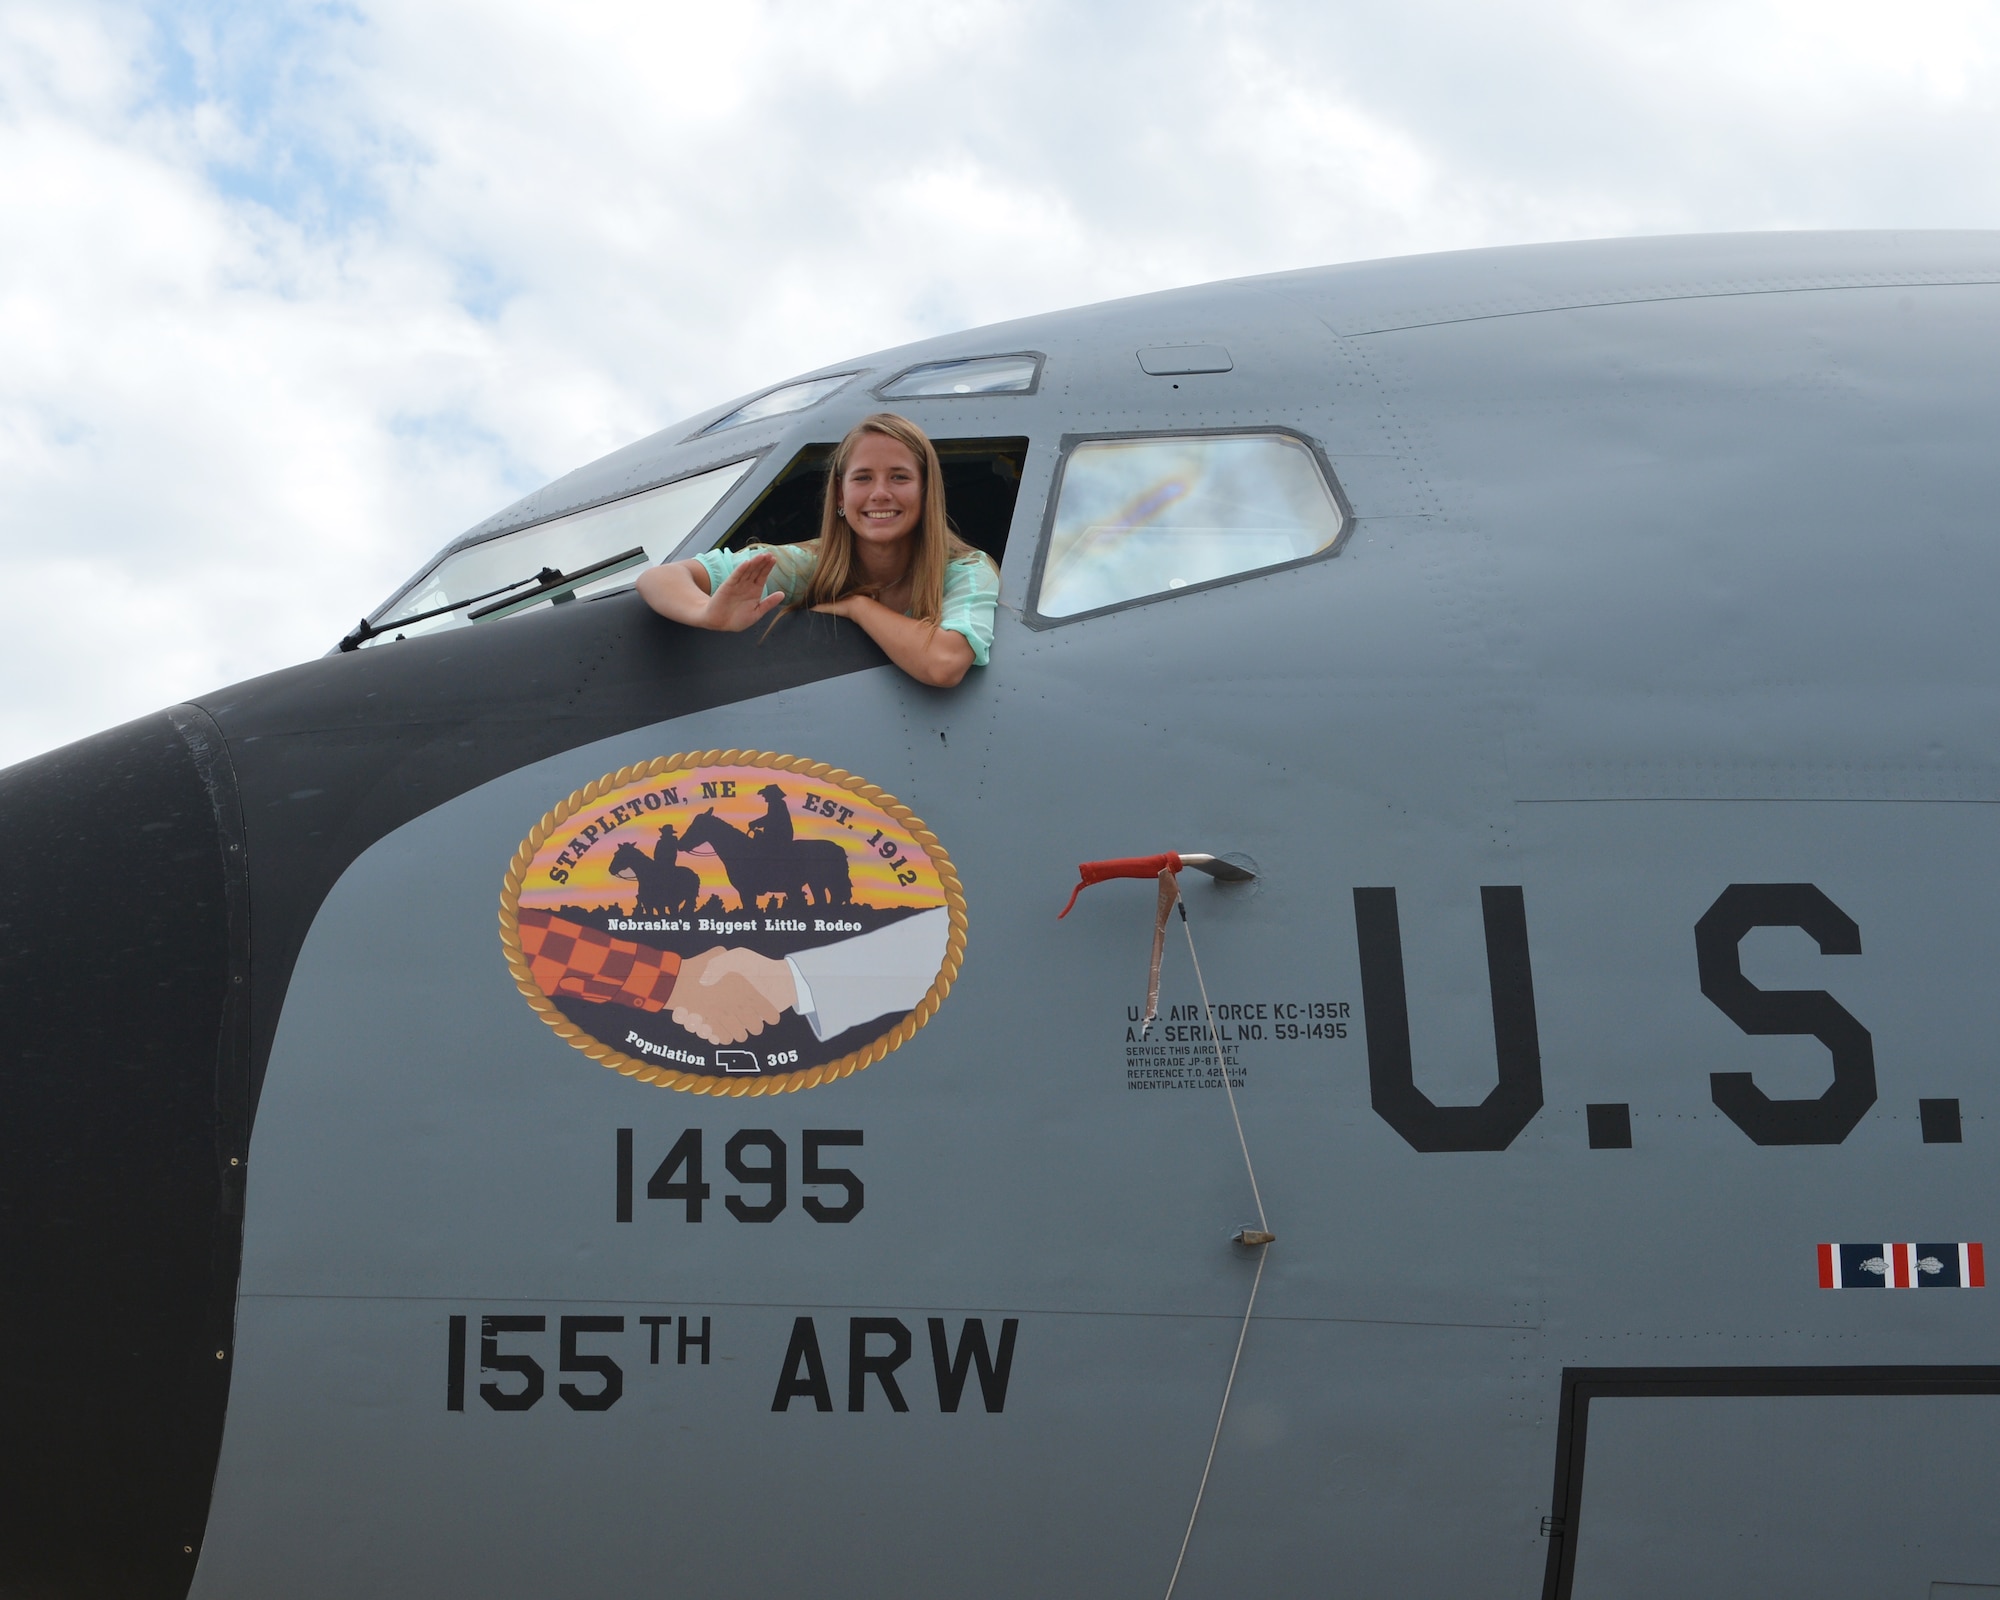 Mariah Harm, a Stapleton, Neb., native and senior at Stapleton High School, unveils her artwork on the nose of a KC-135R Stratotanker at the 155th Air Refueling Wing, Nebraska Air National Guard Base Aug. 8, in Lincoln, Neb.